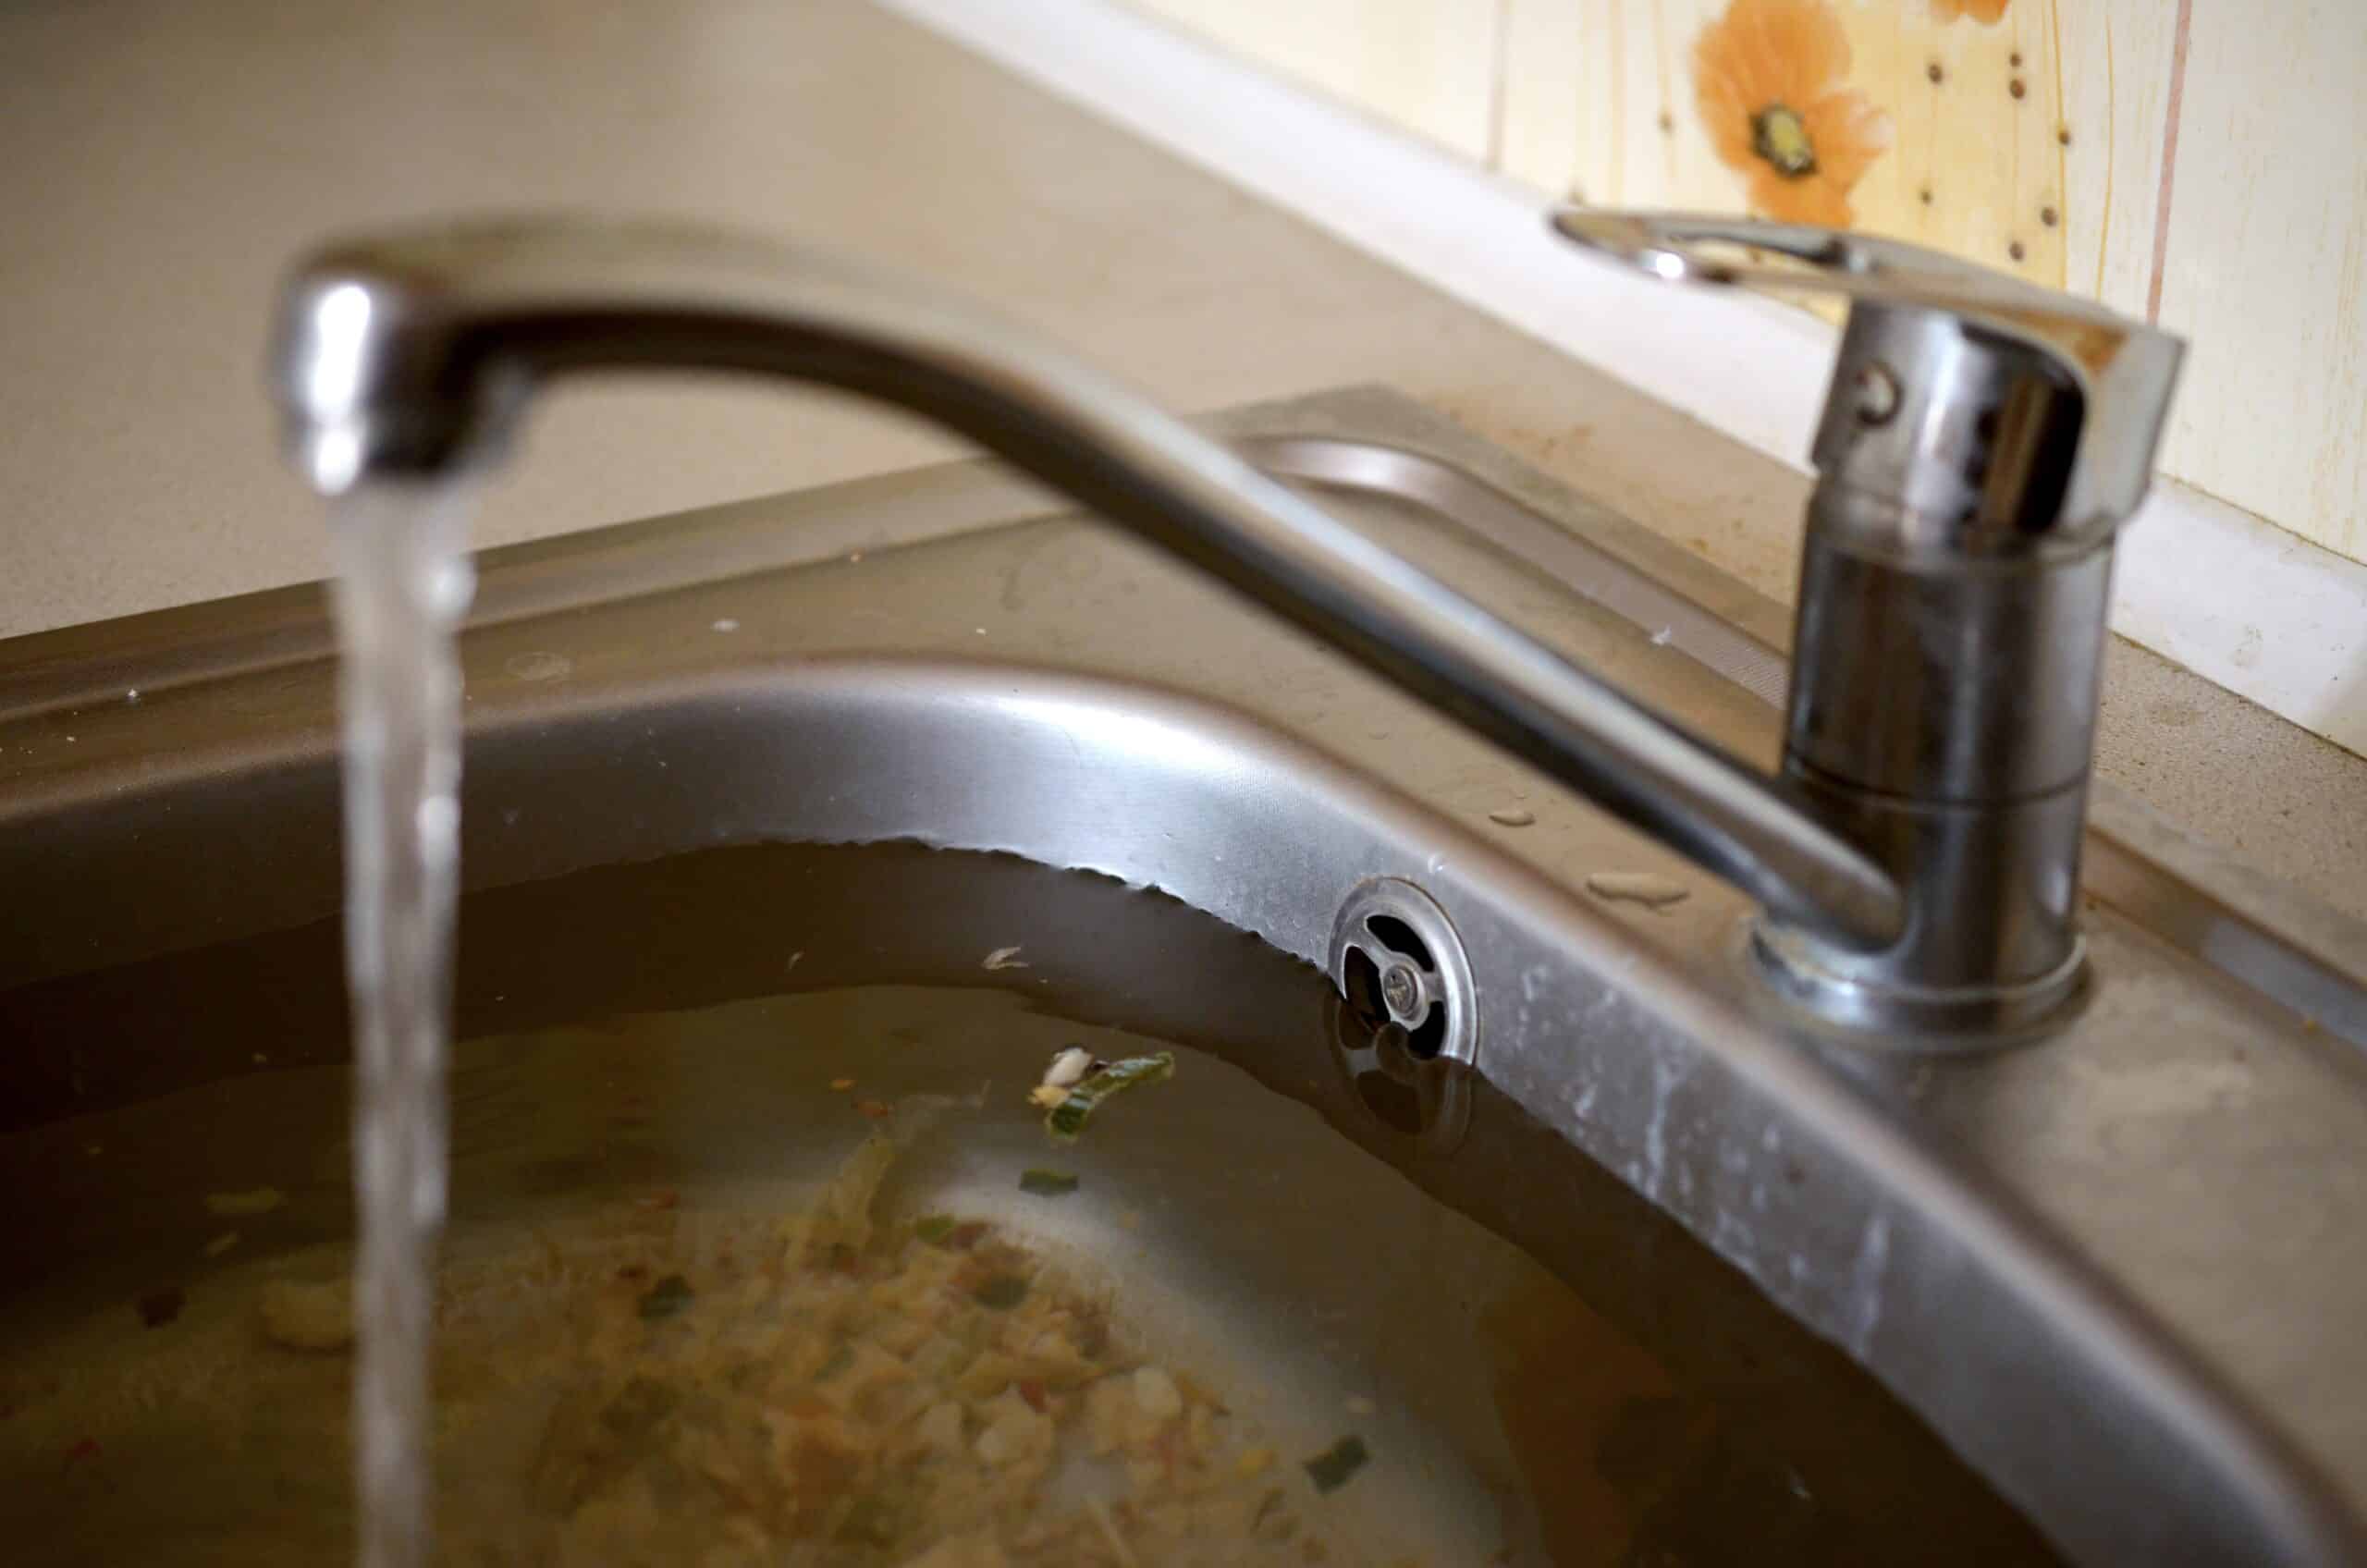 Stainless steel sink plug hole close up full of water and particles of food. Overflowing kitchen sink, clogged drain.